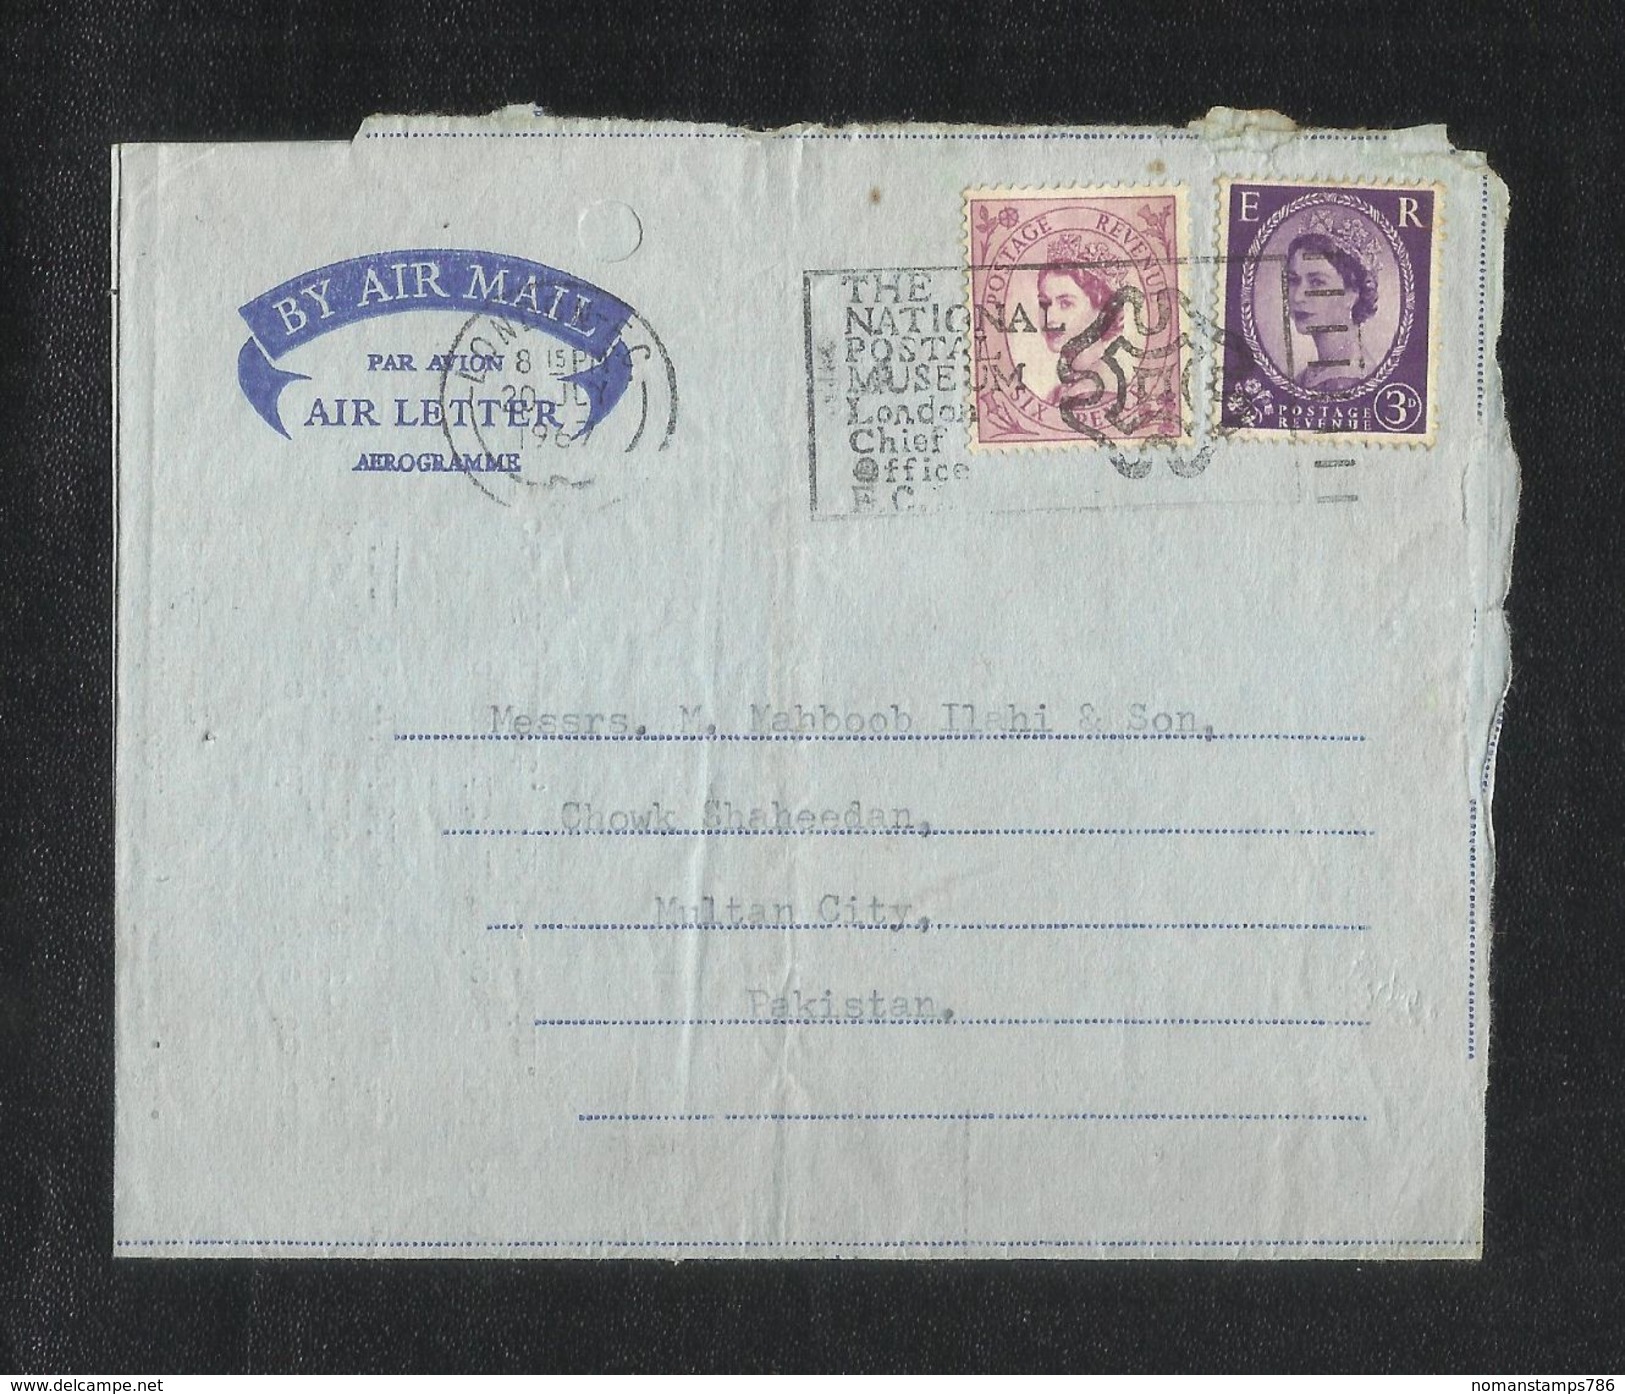 Great Britain England 1967 Slogan Postmark Air Mail Postal Used Air Letter Aerogramme Cover London To Pakistan - Entiers Postaux